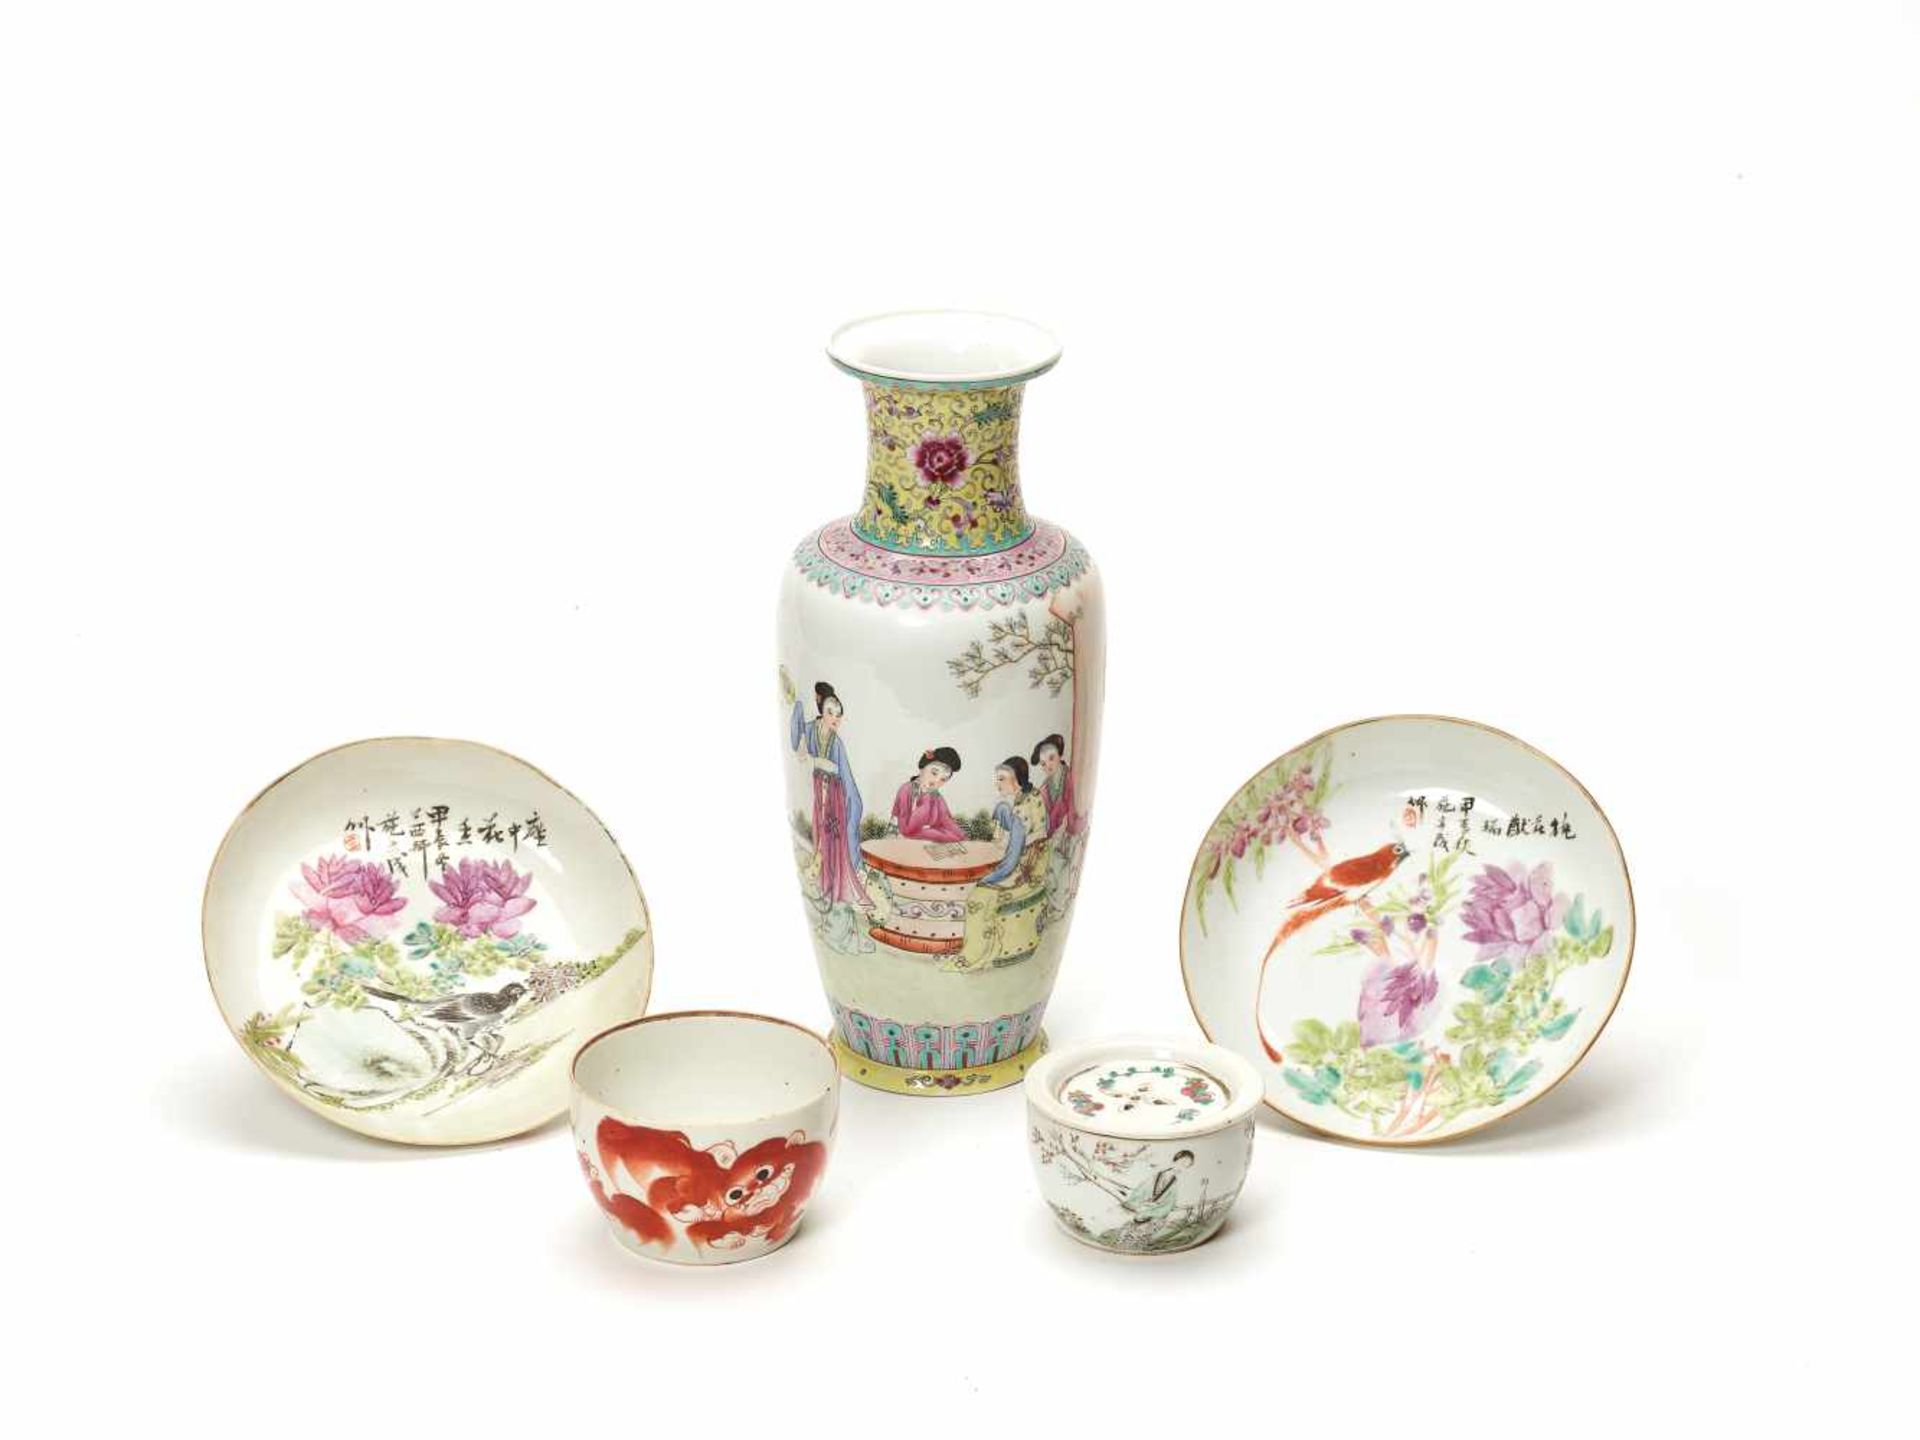 A GROUP OF CHINESE PORCELAIN OBJECTS, REPUBLIC PERIODPorcelain, hand-paintedChina, Republic